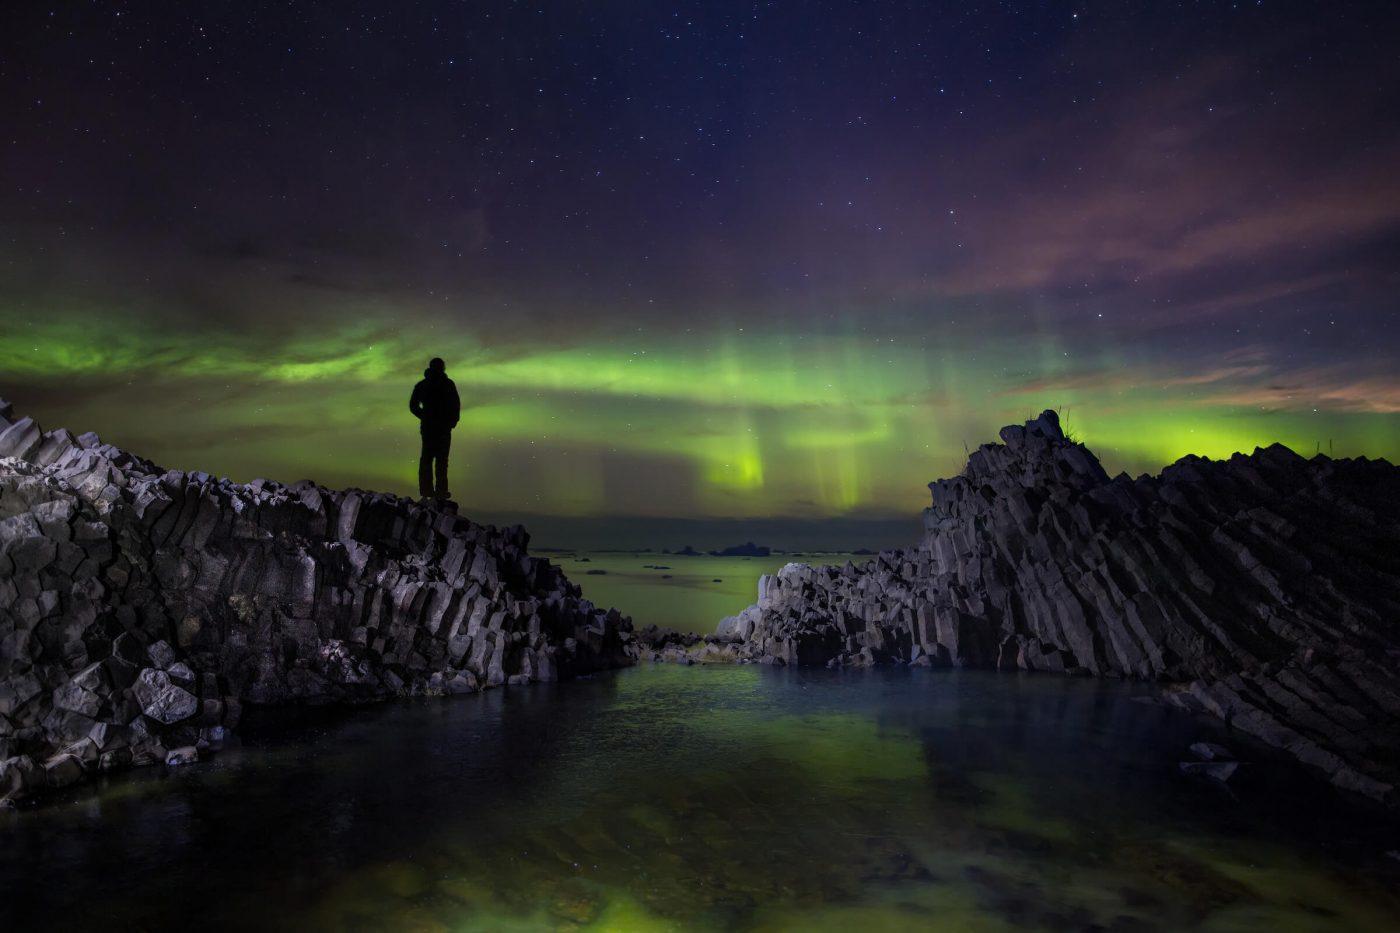 Hiker standing on volcanic rooks on Disko Island in North Greenland looking at northern lights dancing over the ocean. Photo by Paul Zizka - Visit Greenland